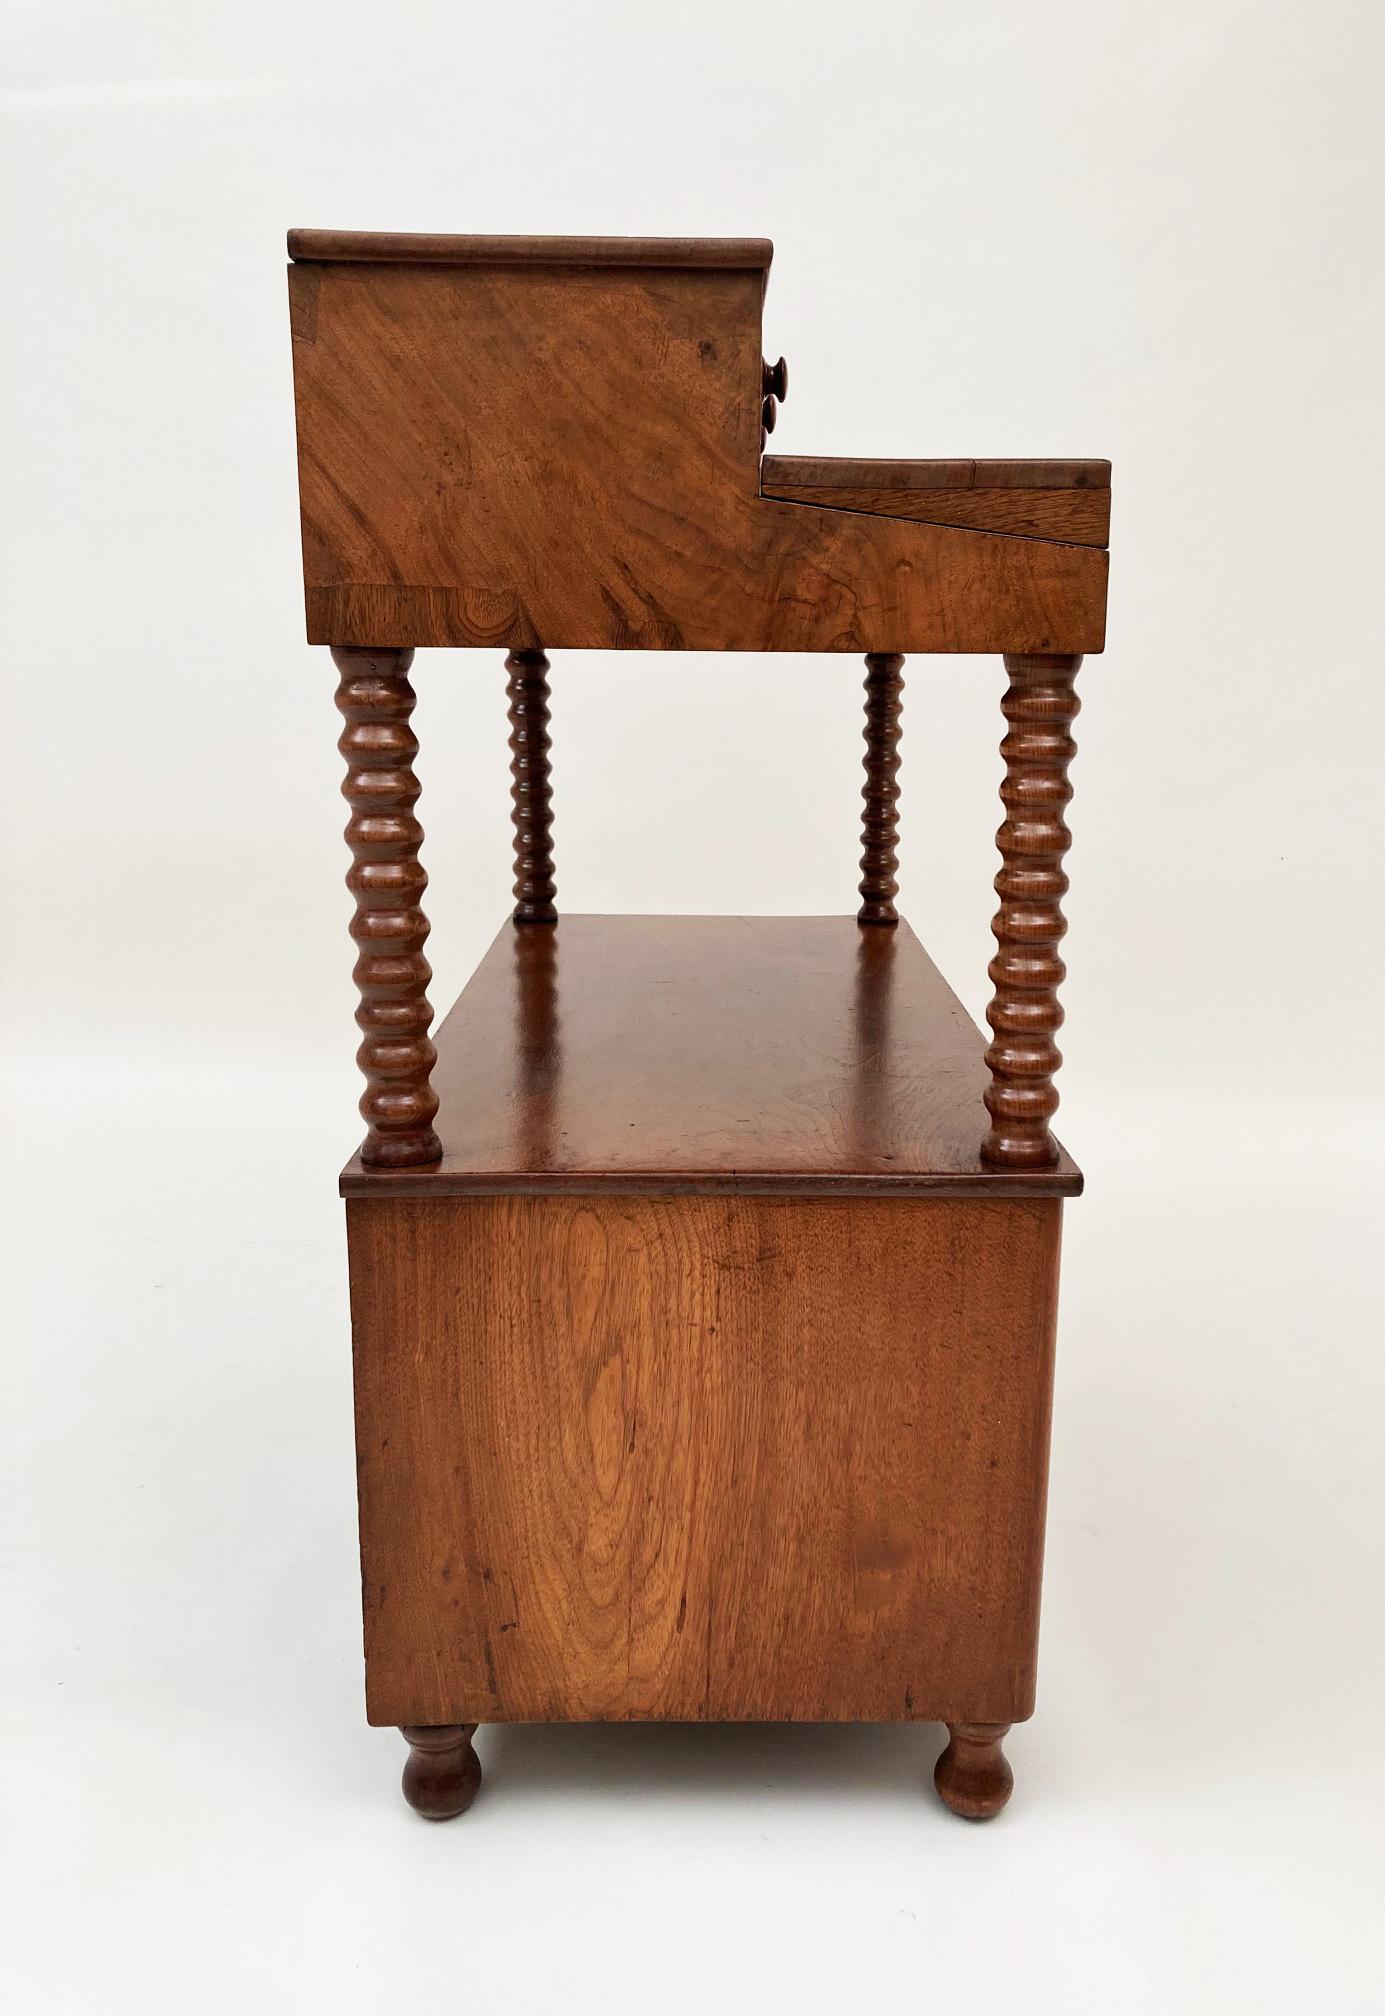 Hand-Crafted 18th Century Kentucky Butternut Ladies Desk For Sale